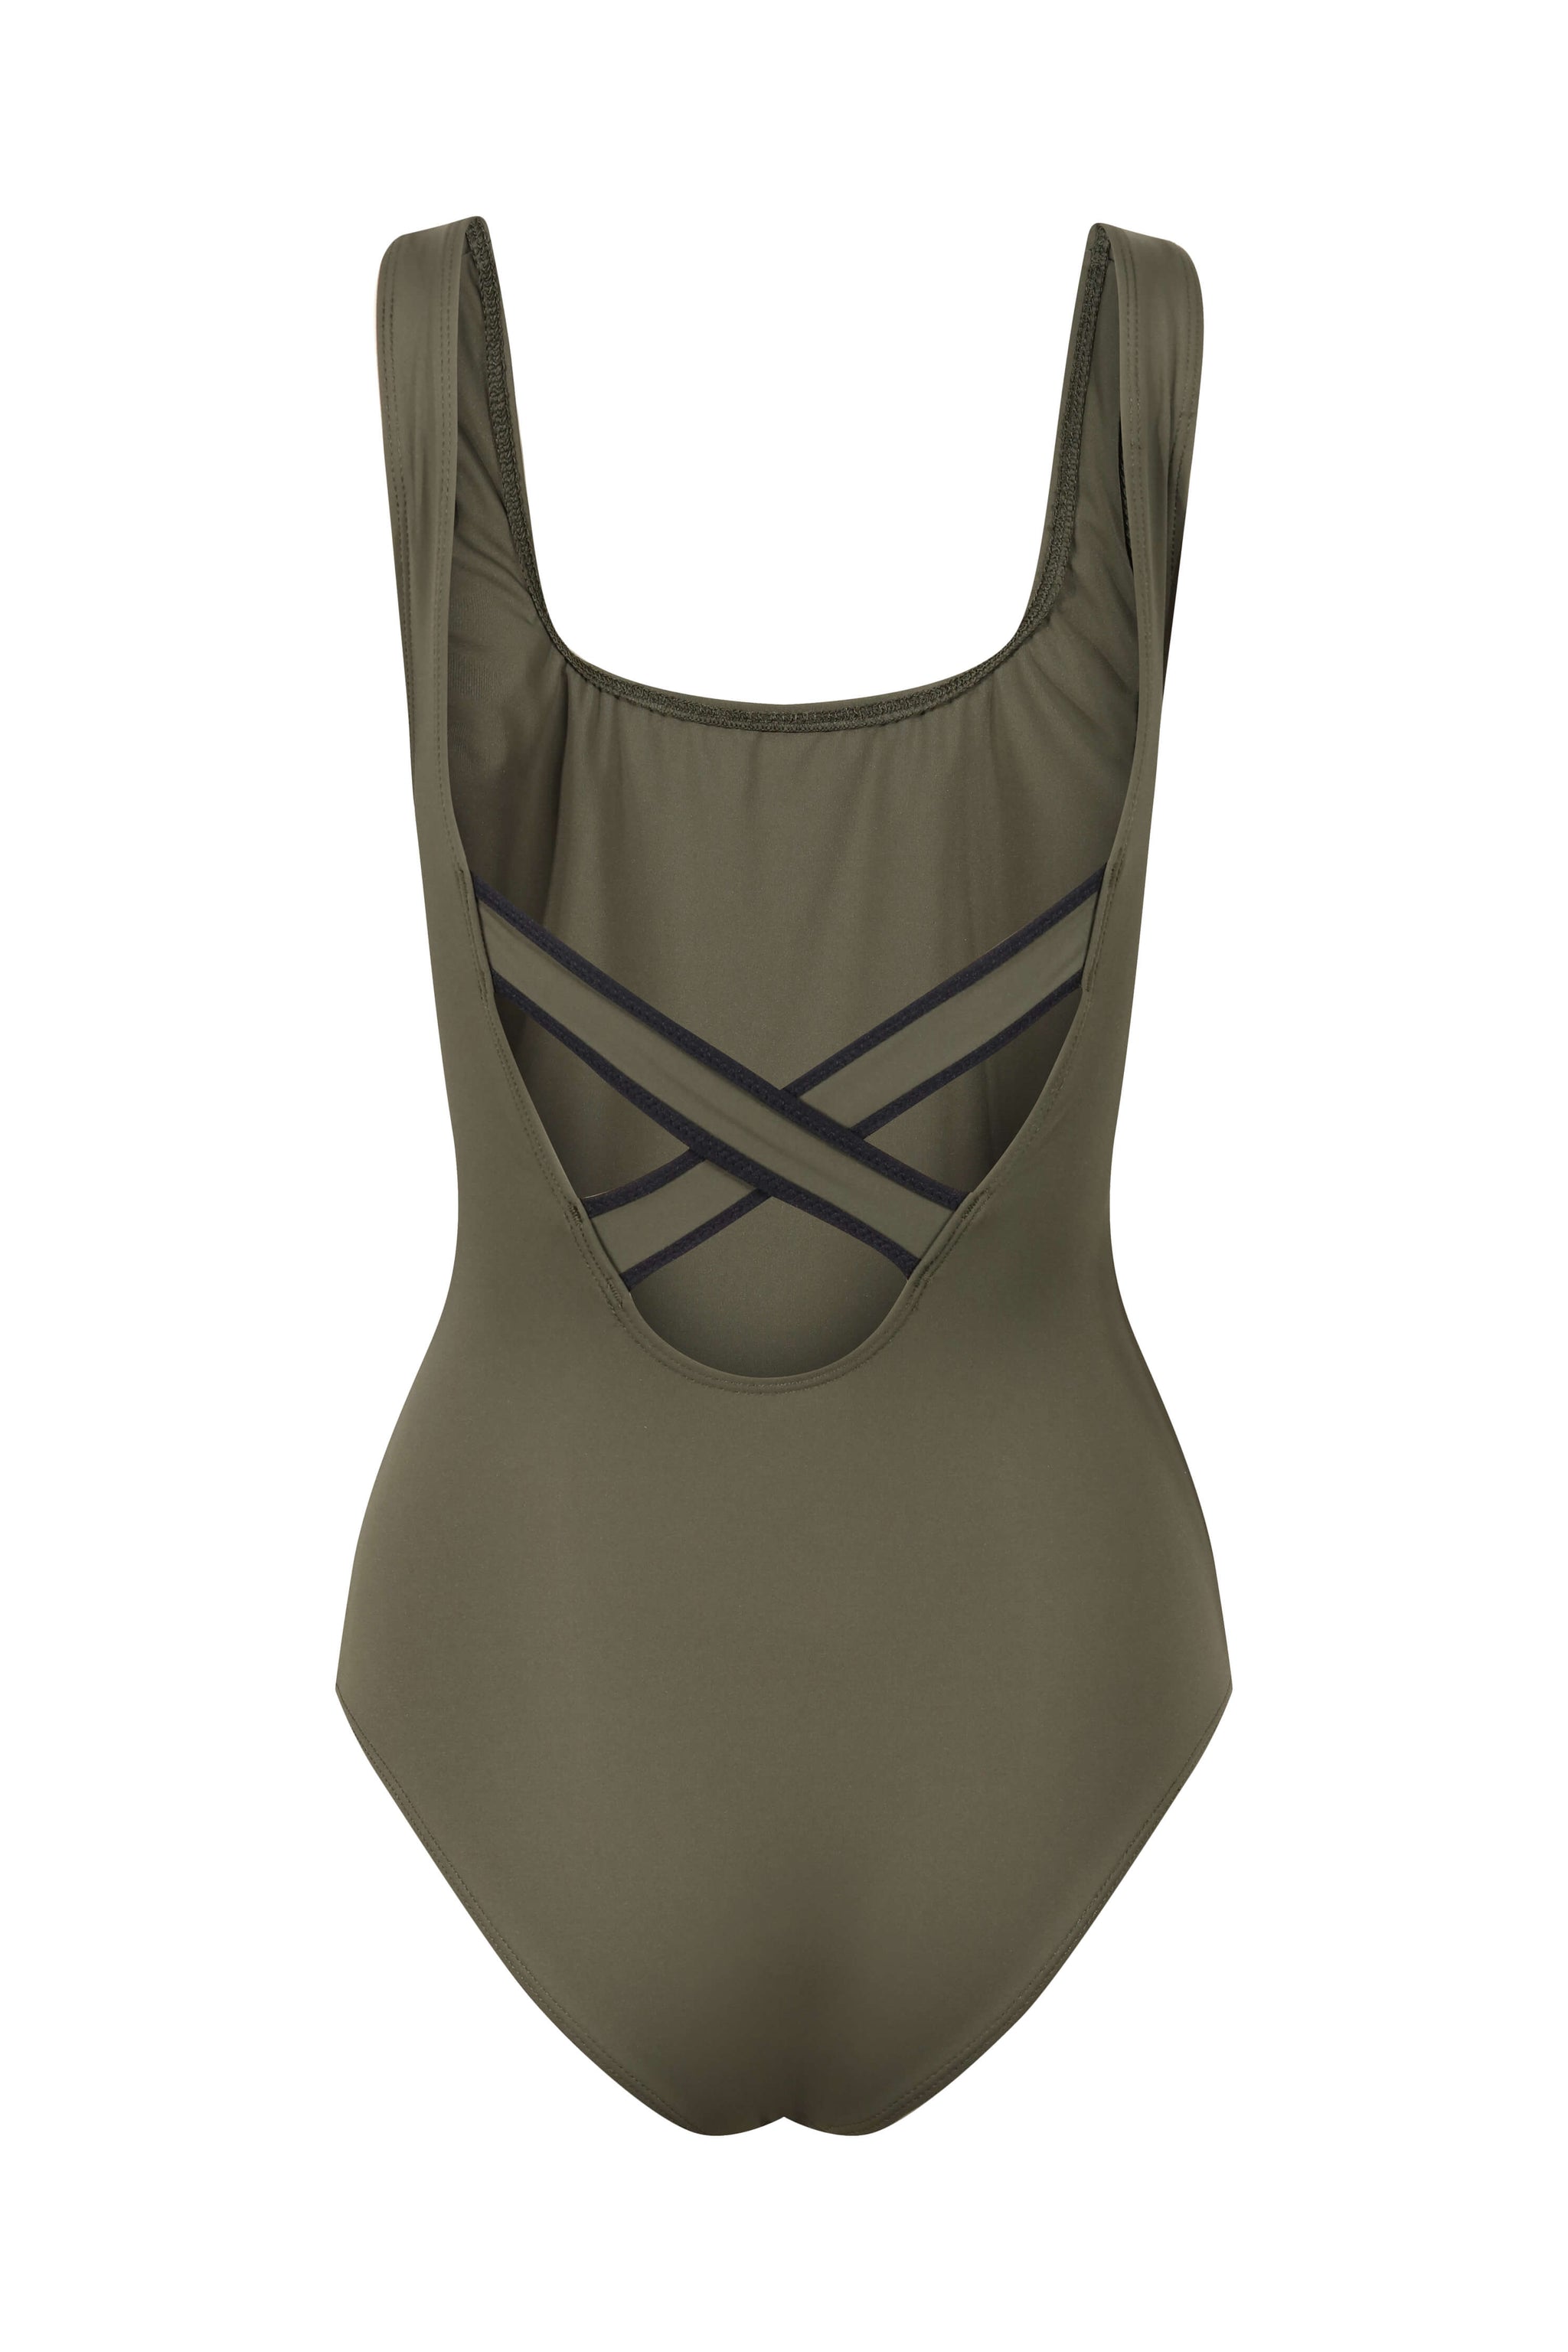 Seea Lido One-Piece Swimsuit, 11 Comfy Swimsuits, Because You Shouldn't  Have to Worry About Wedgies and Loose Straps